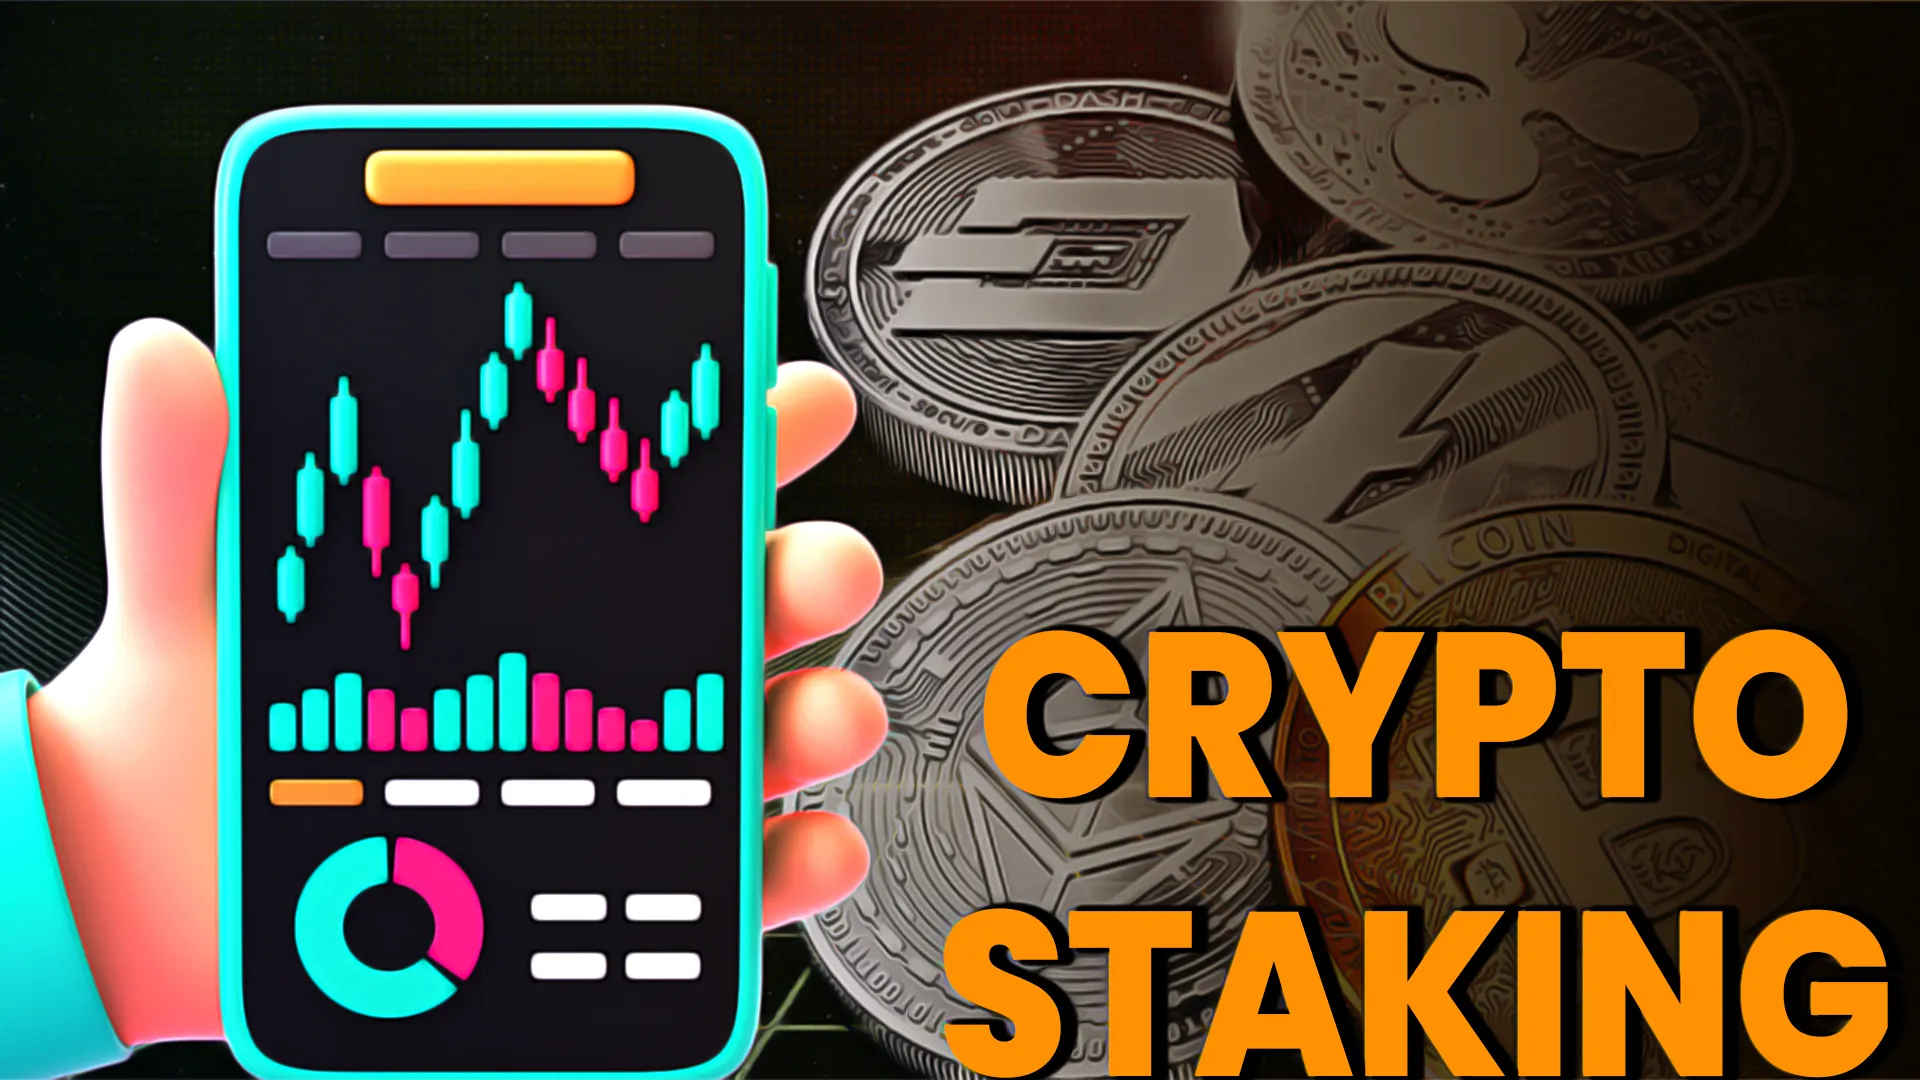 Crypto Staking: Basics to Know About This Rewarding Activity